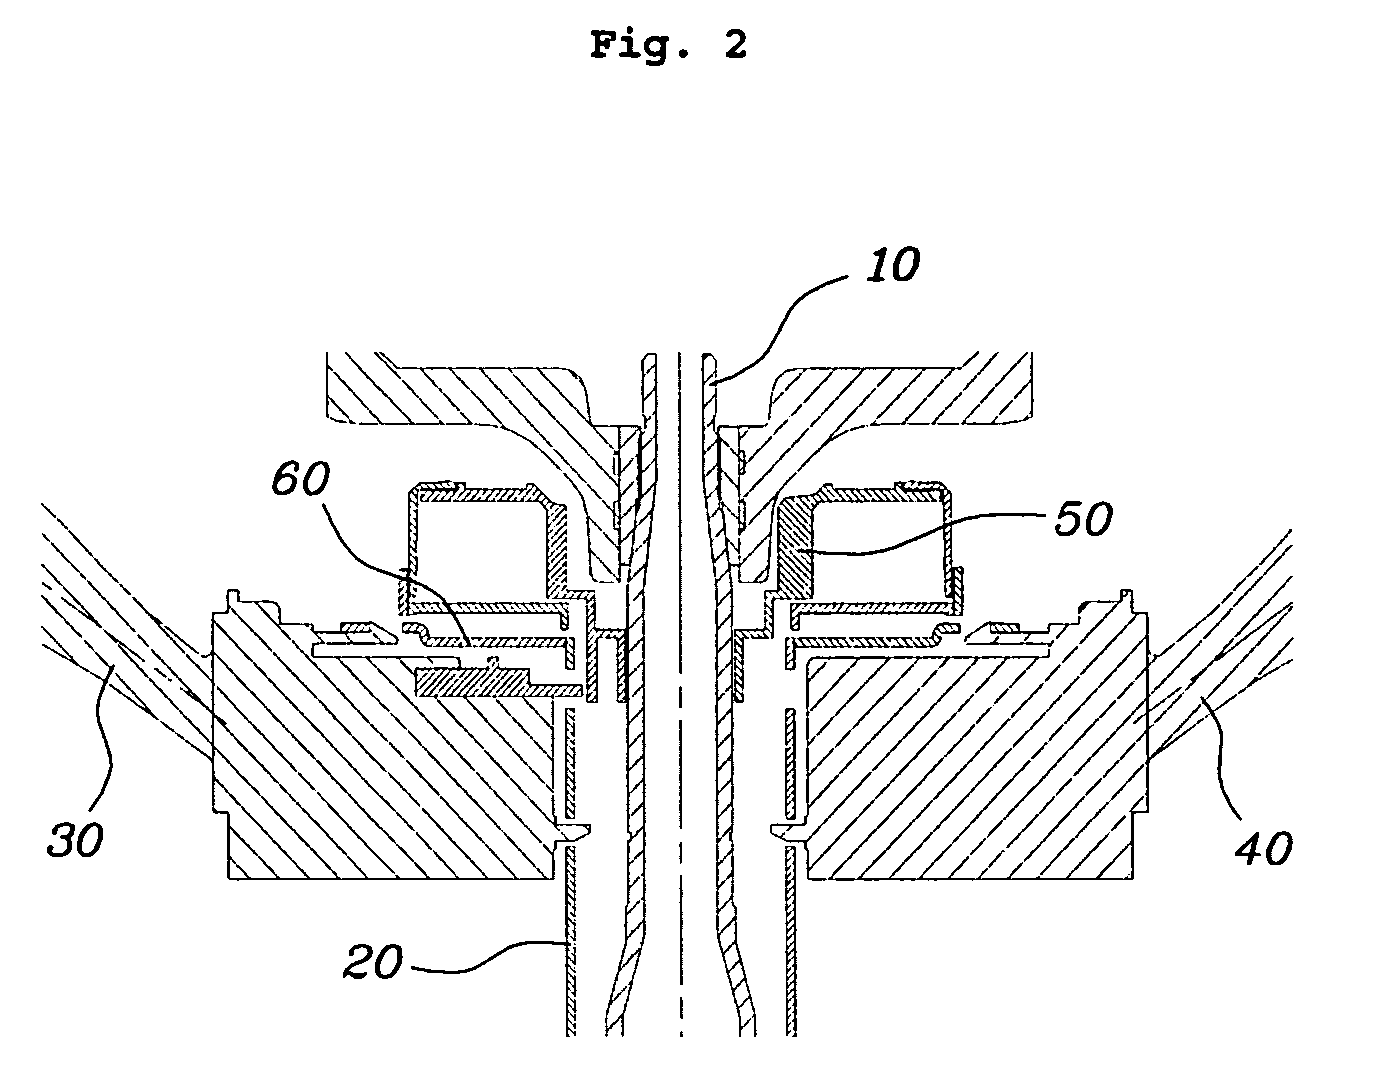 Steering column assembly for vehicle